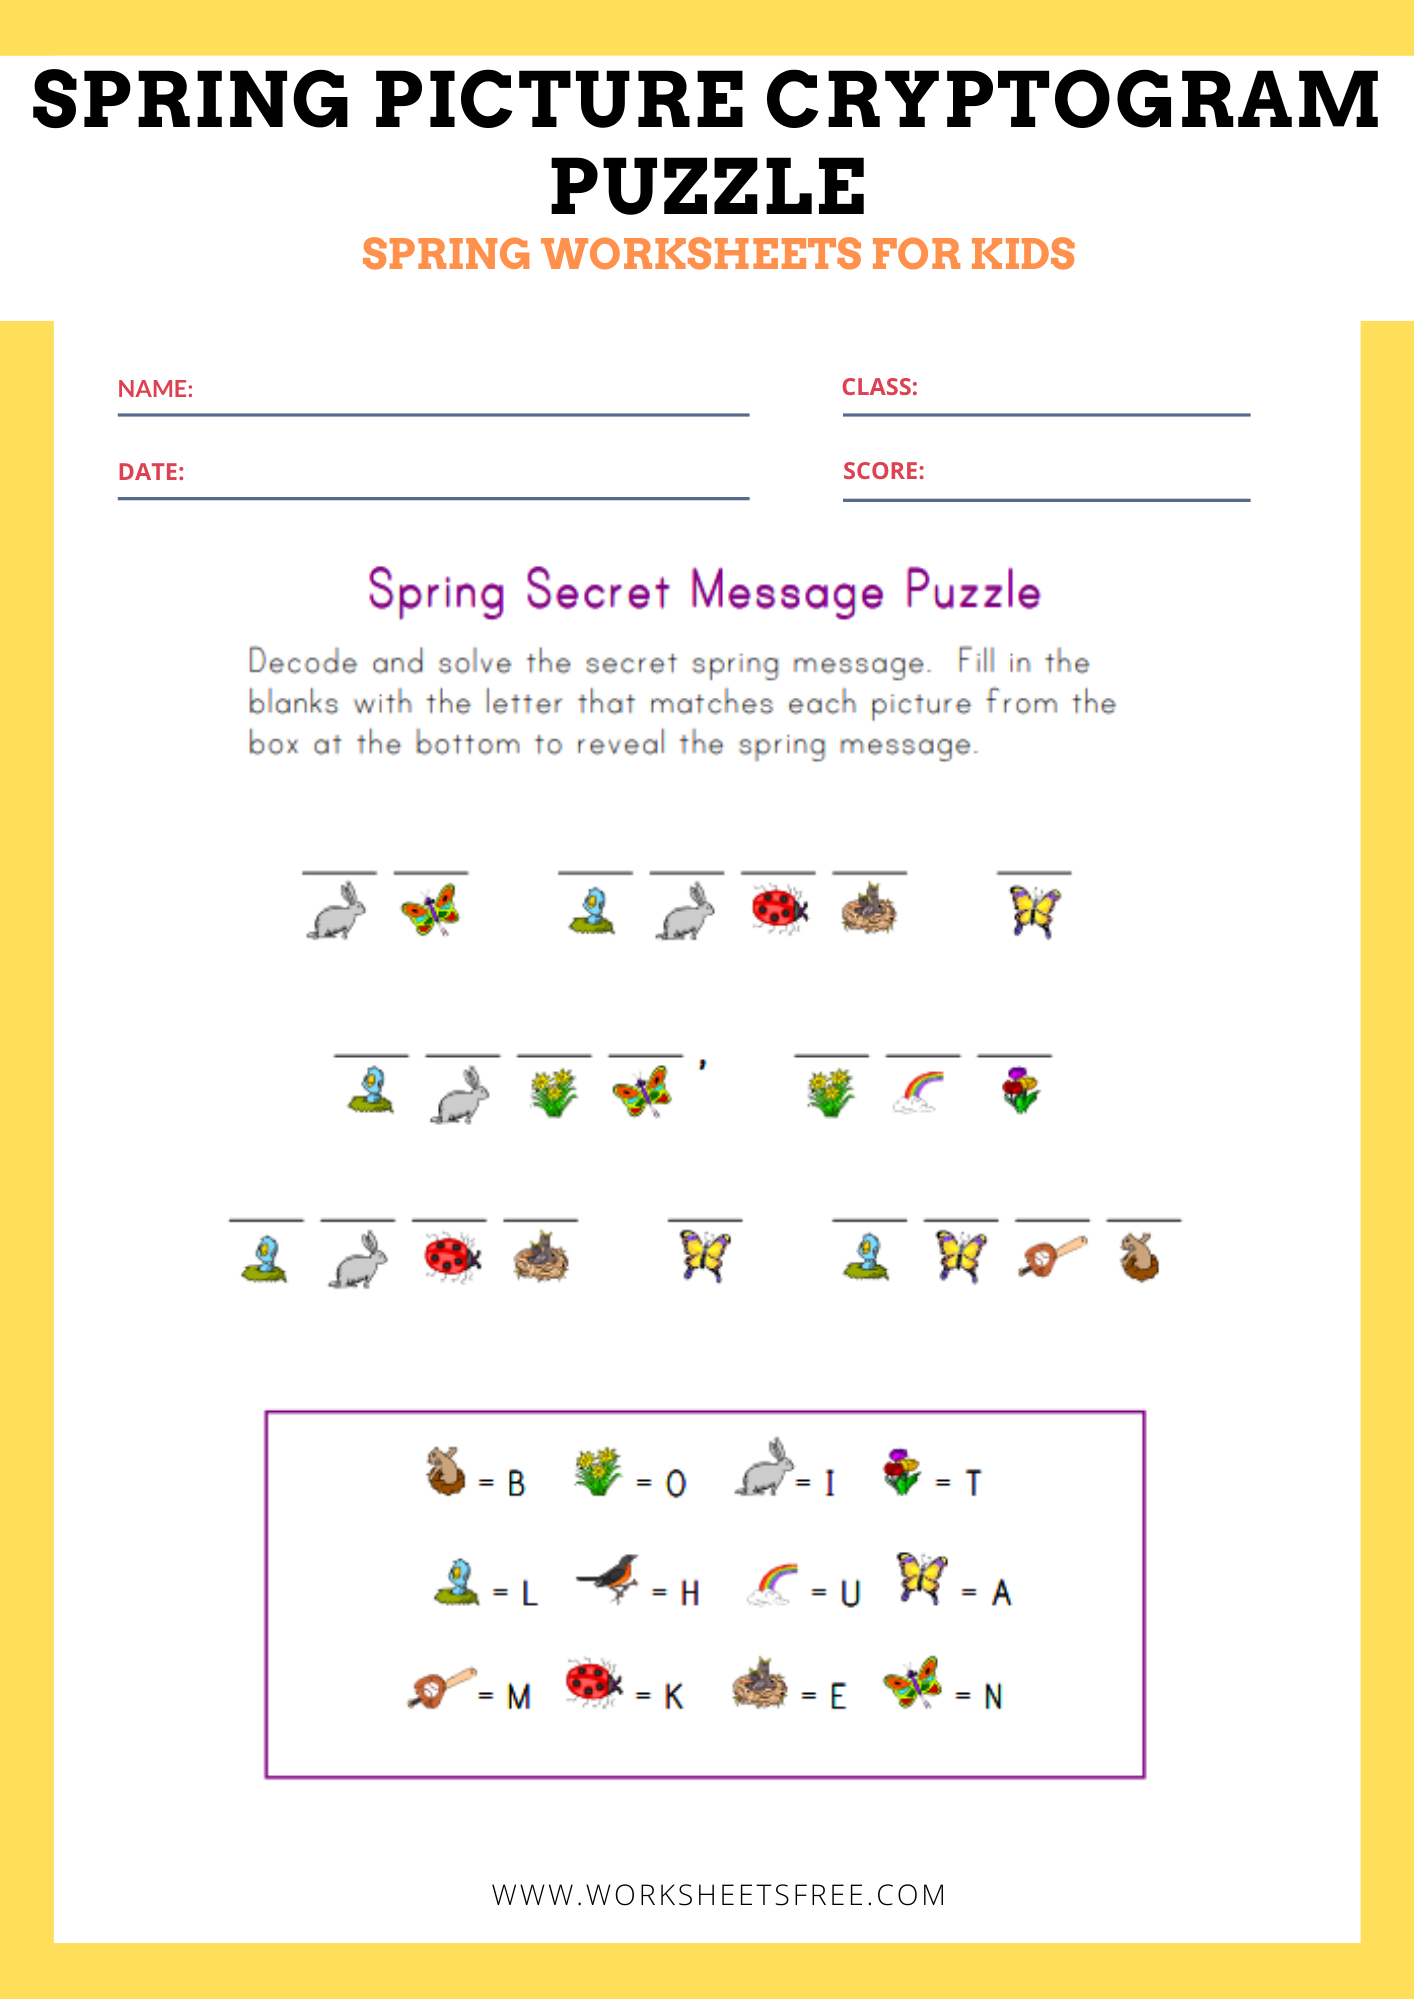 Free Printable Cryptograms / Spring Cryptogram Word Puzzle for Kids